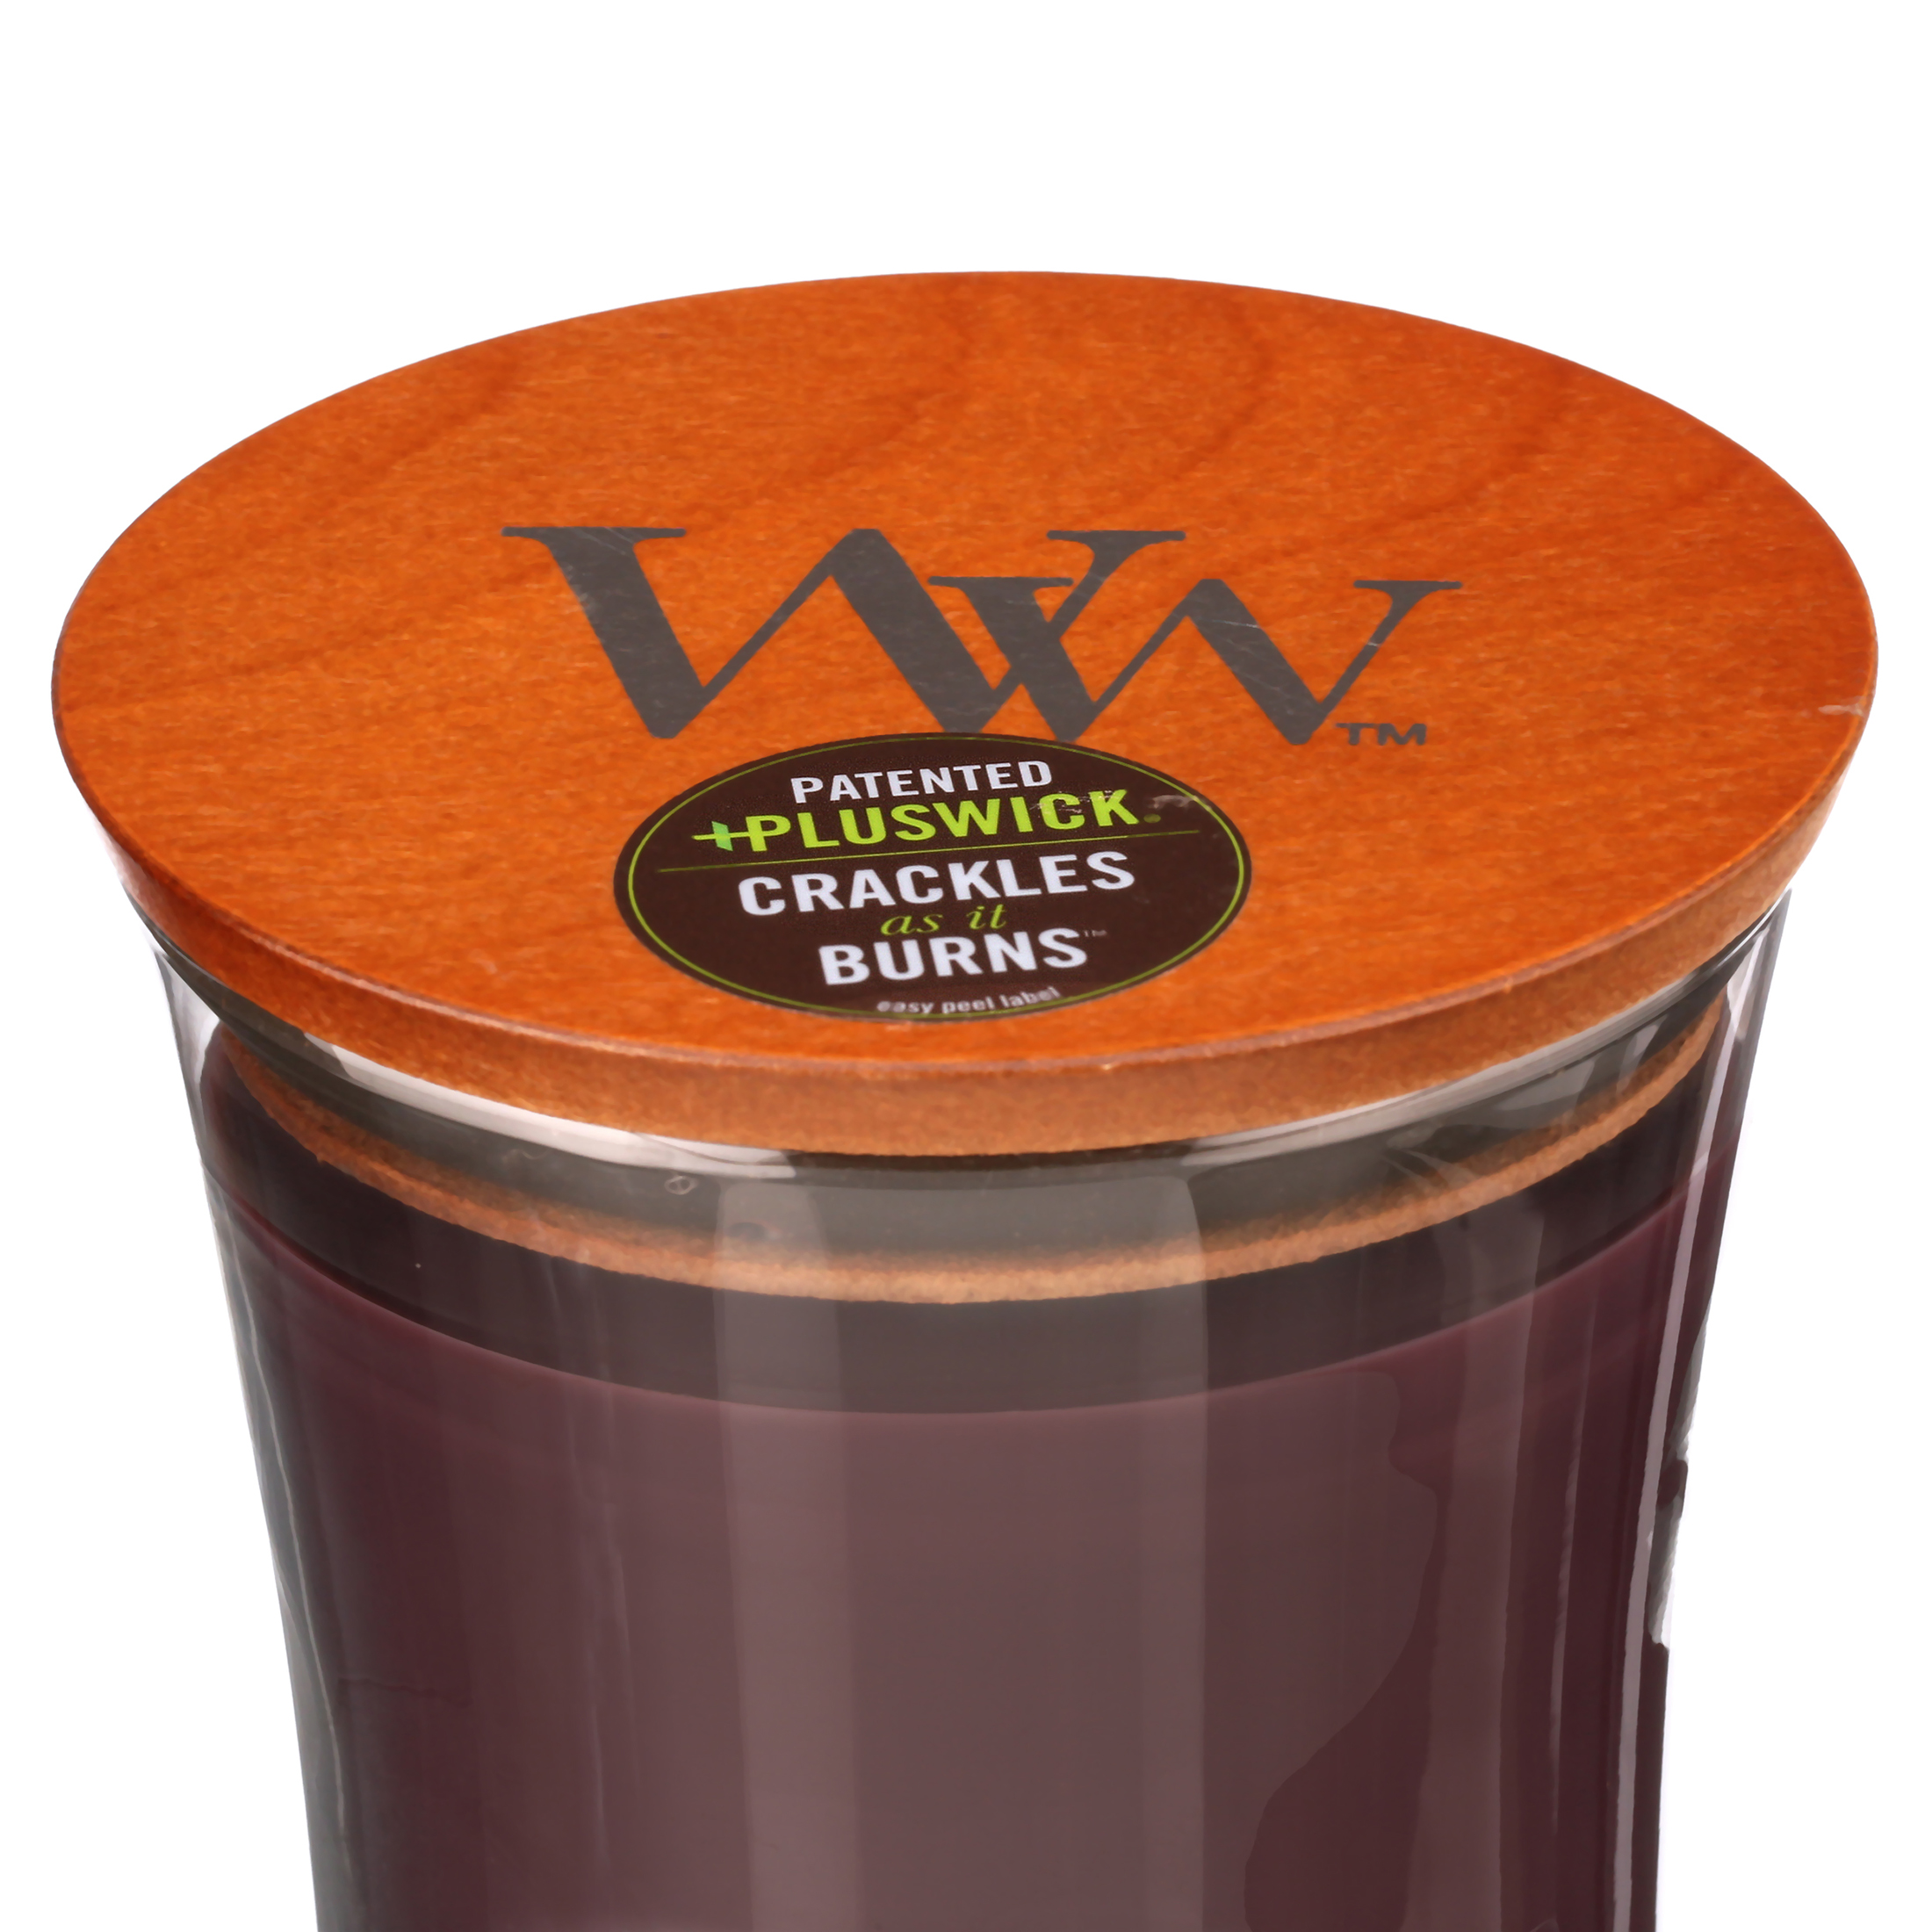 WoodWick Spiced Blackberry - Medium Hourglass Candle - image 2 of 3